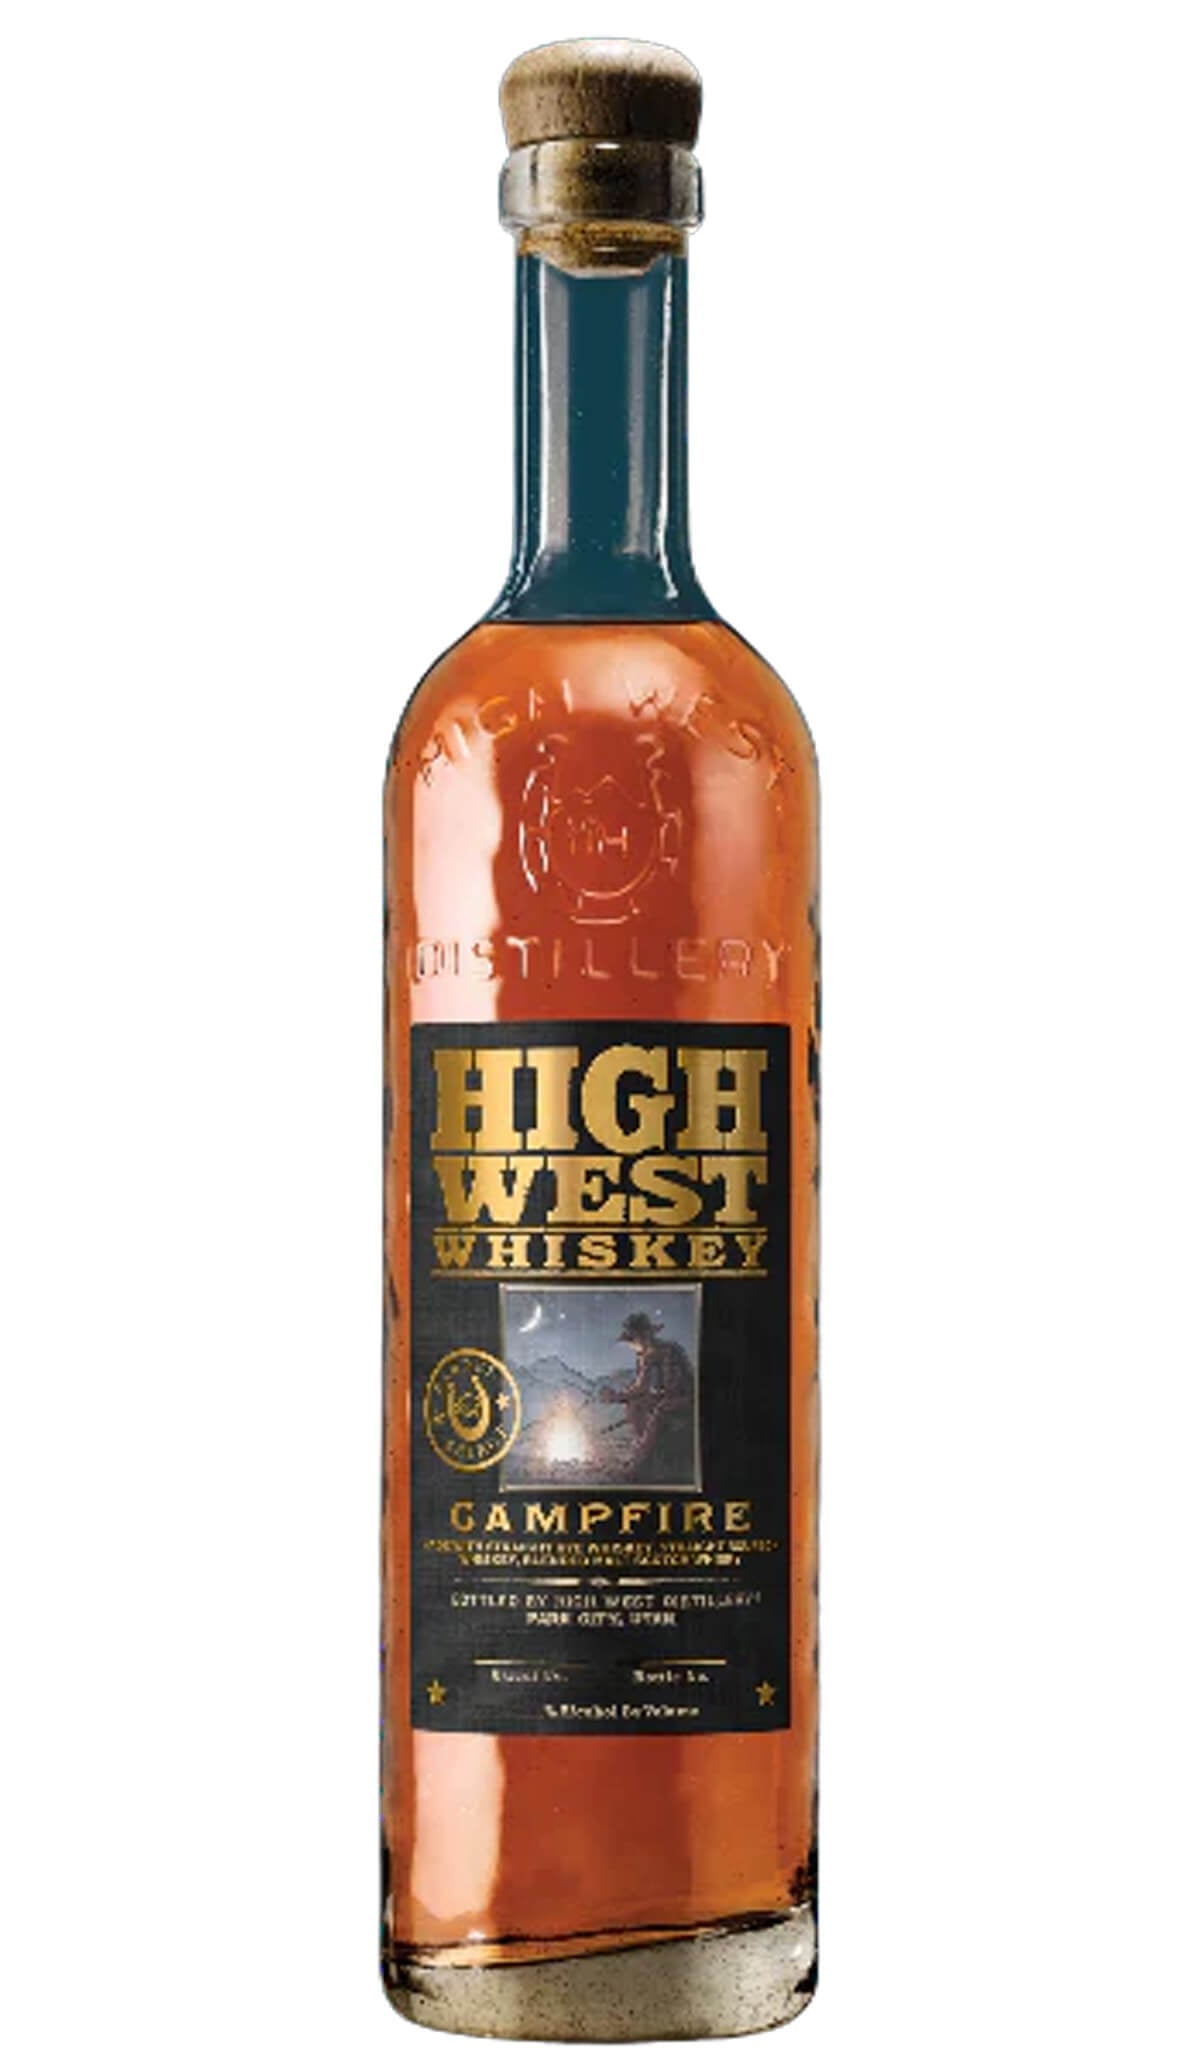 Find out more, explore the range and purchase High West Barrel Select Campfire 750ml available online at Wine Sellers Direct - Australia's independent liquor specialists.